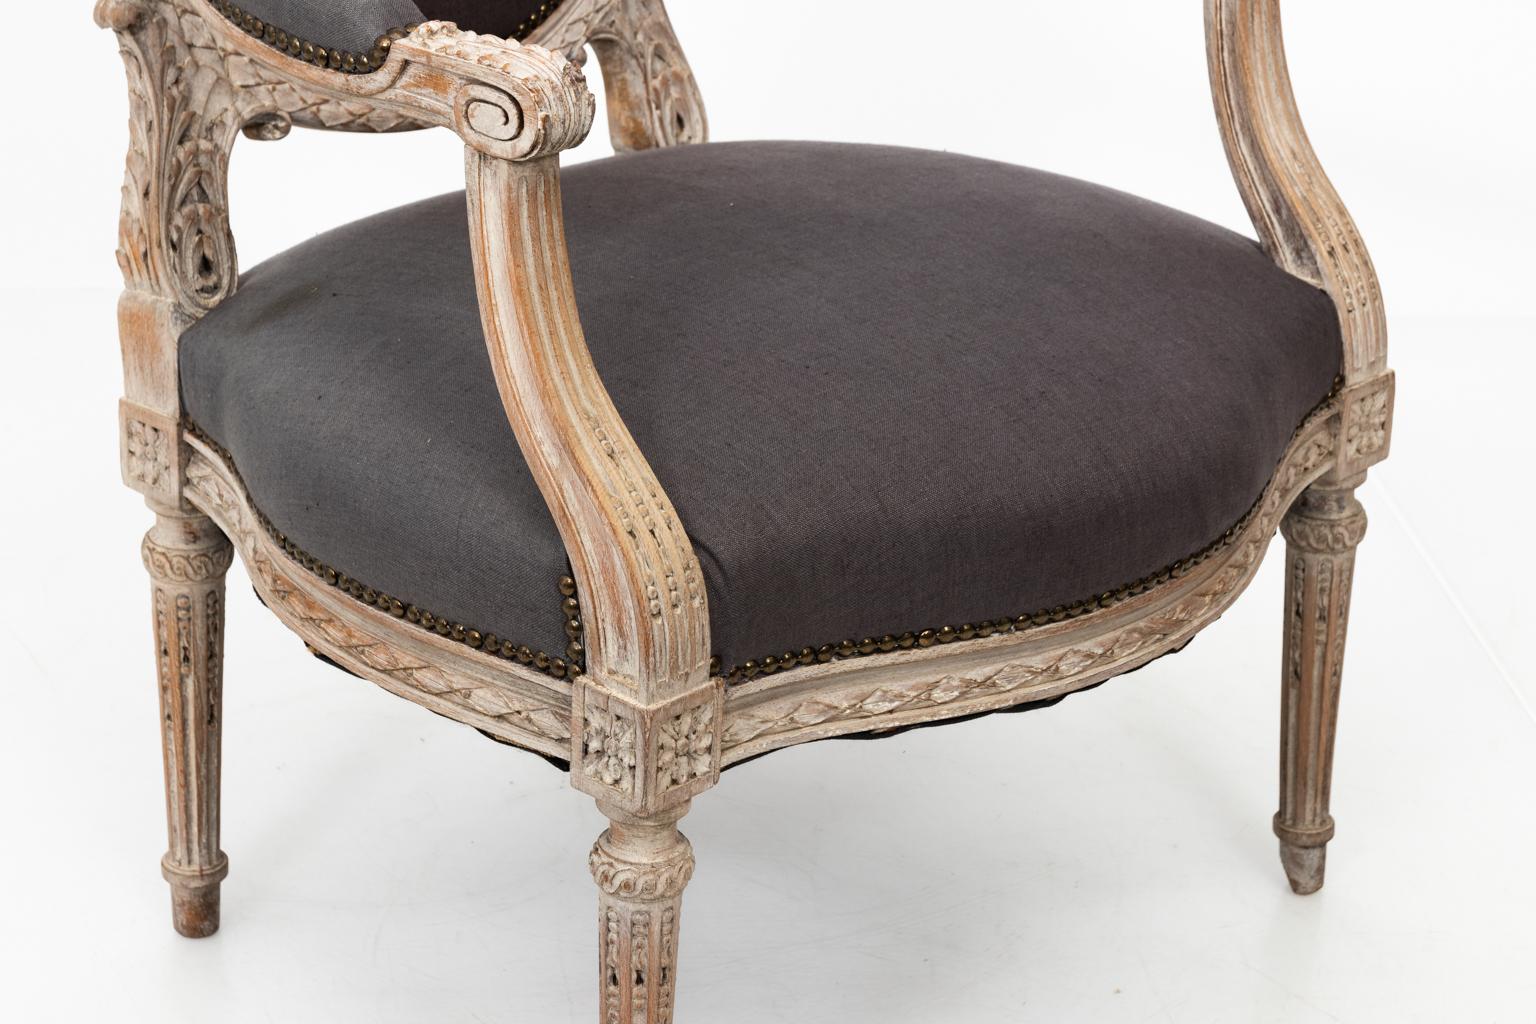 Pair of Louis XVI style walnut carved armchairs in grey upholstery from the South of France, circa 1820. The chairs feature a rounded back with brass nailhead trim. Please note of wear consistent with age including a worn finish to the paint.